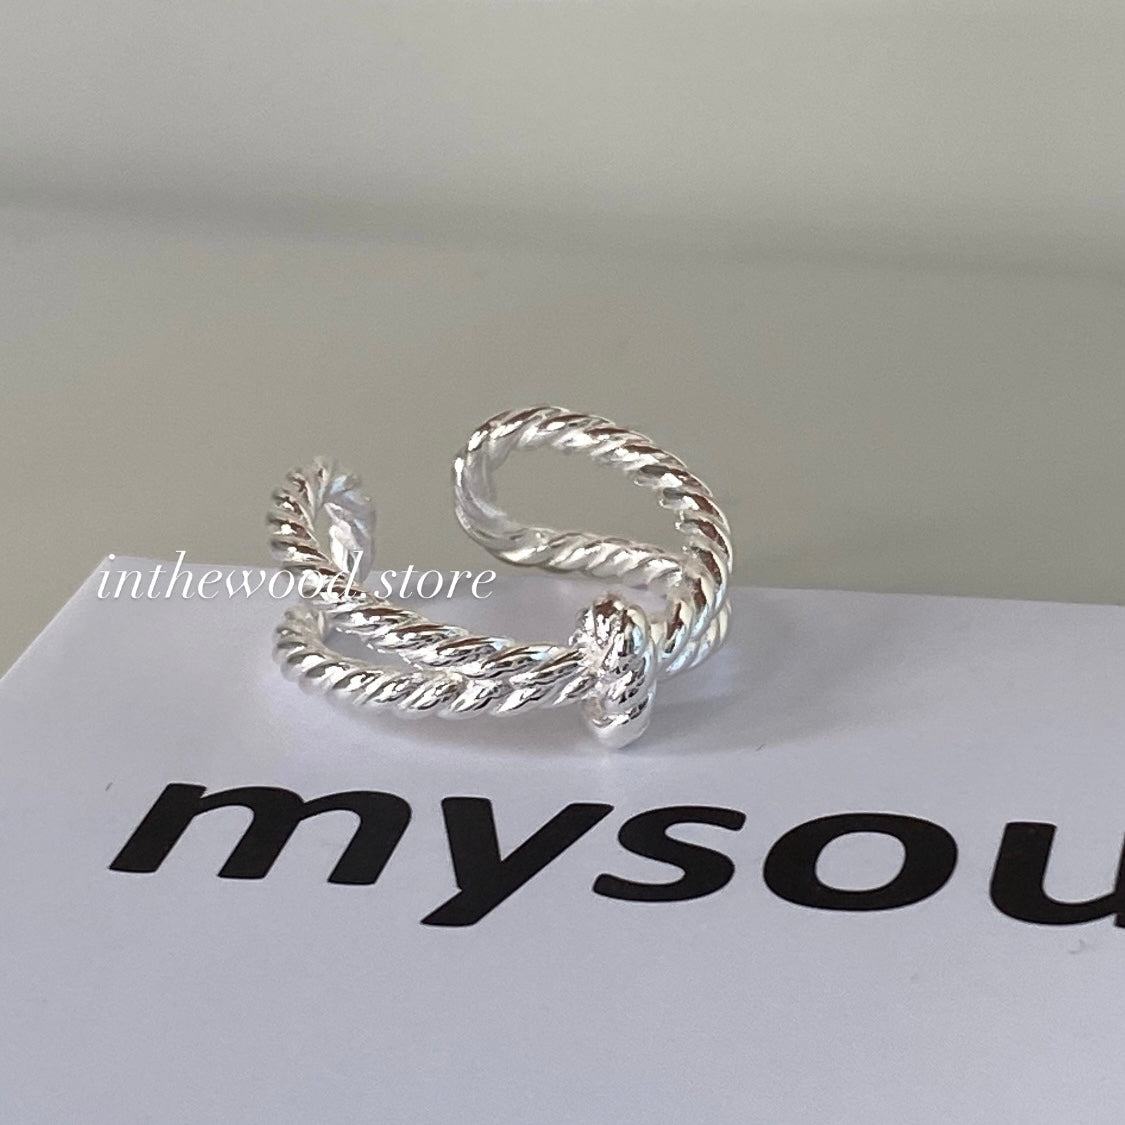 [925silver] Twist Knot Ring